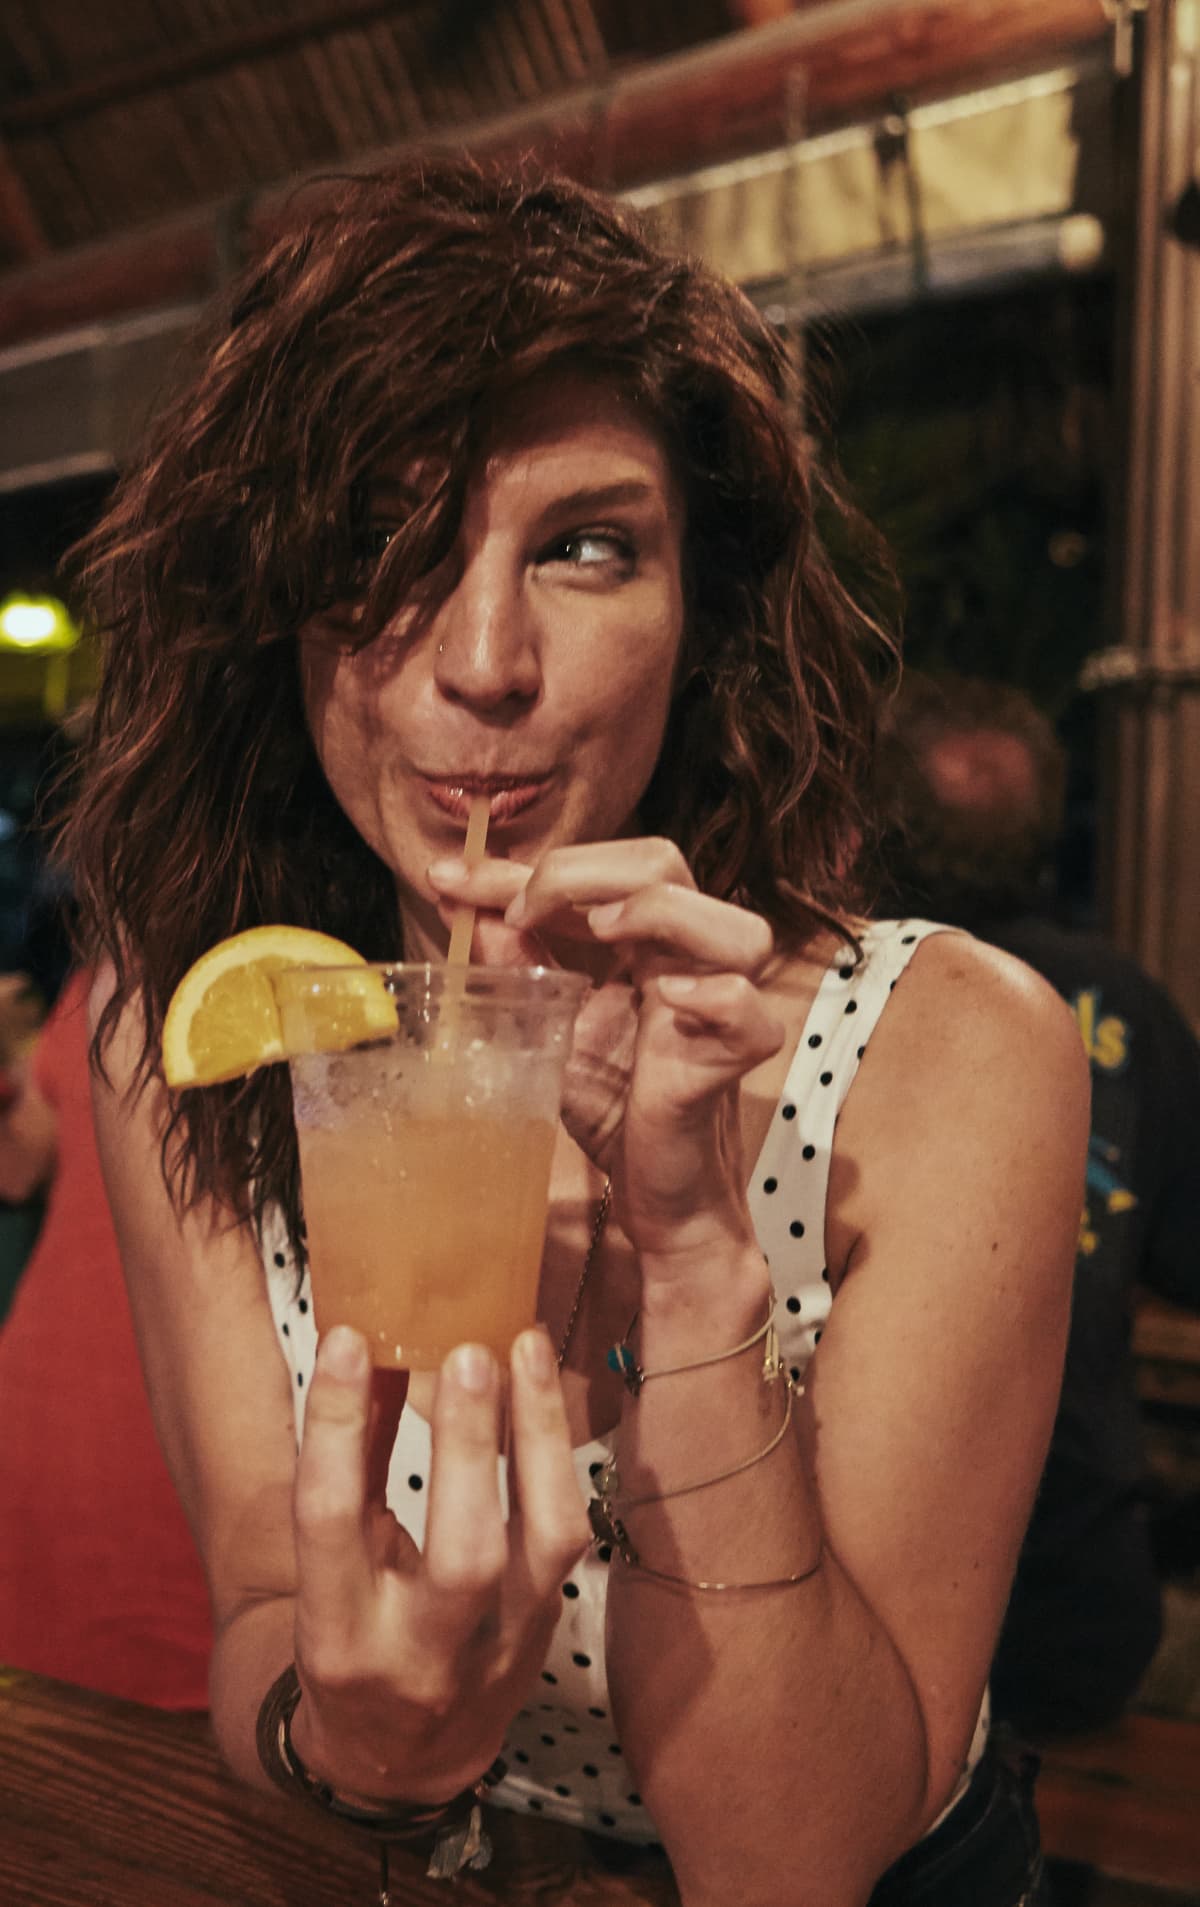 A young woman sips a mocktail while smiling